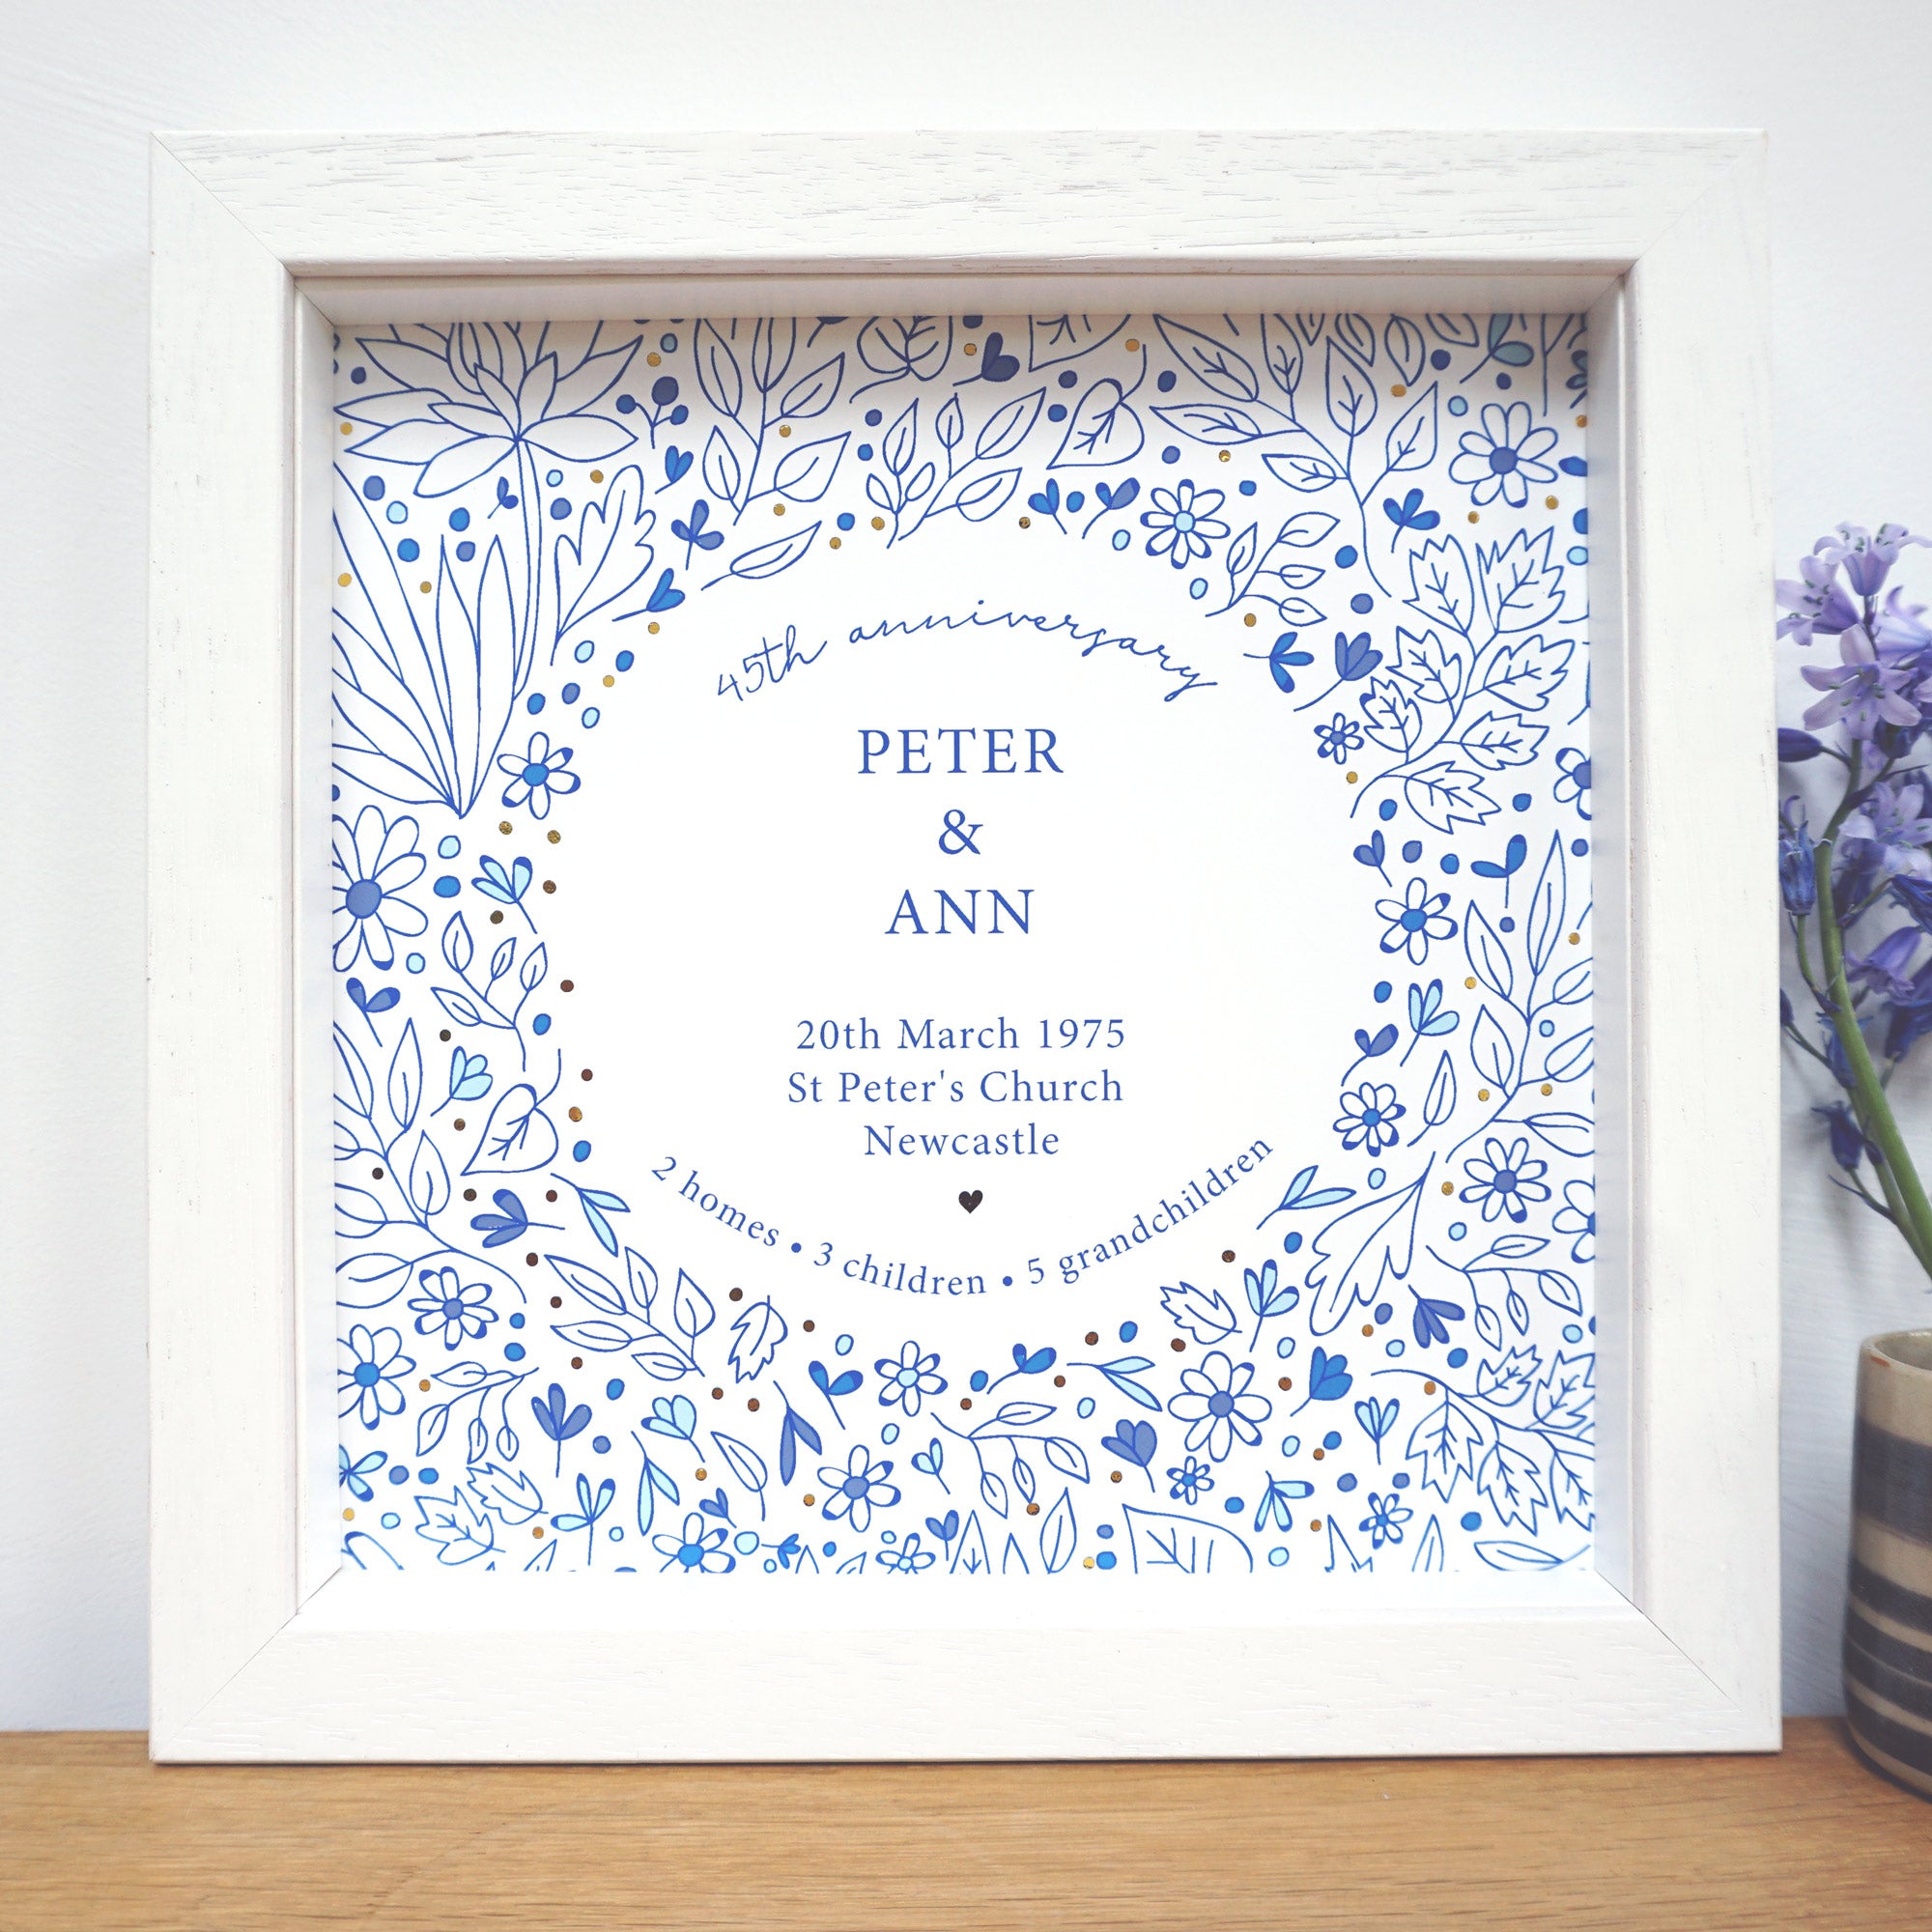 Personalised 45th Anniversary Frame - Ant Design Gifts